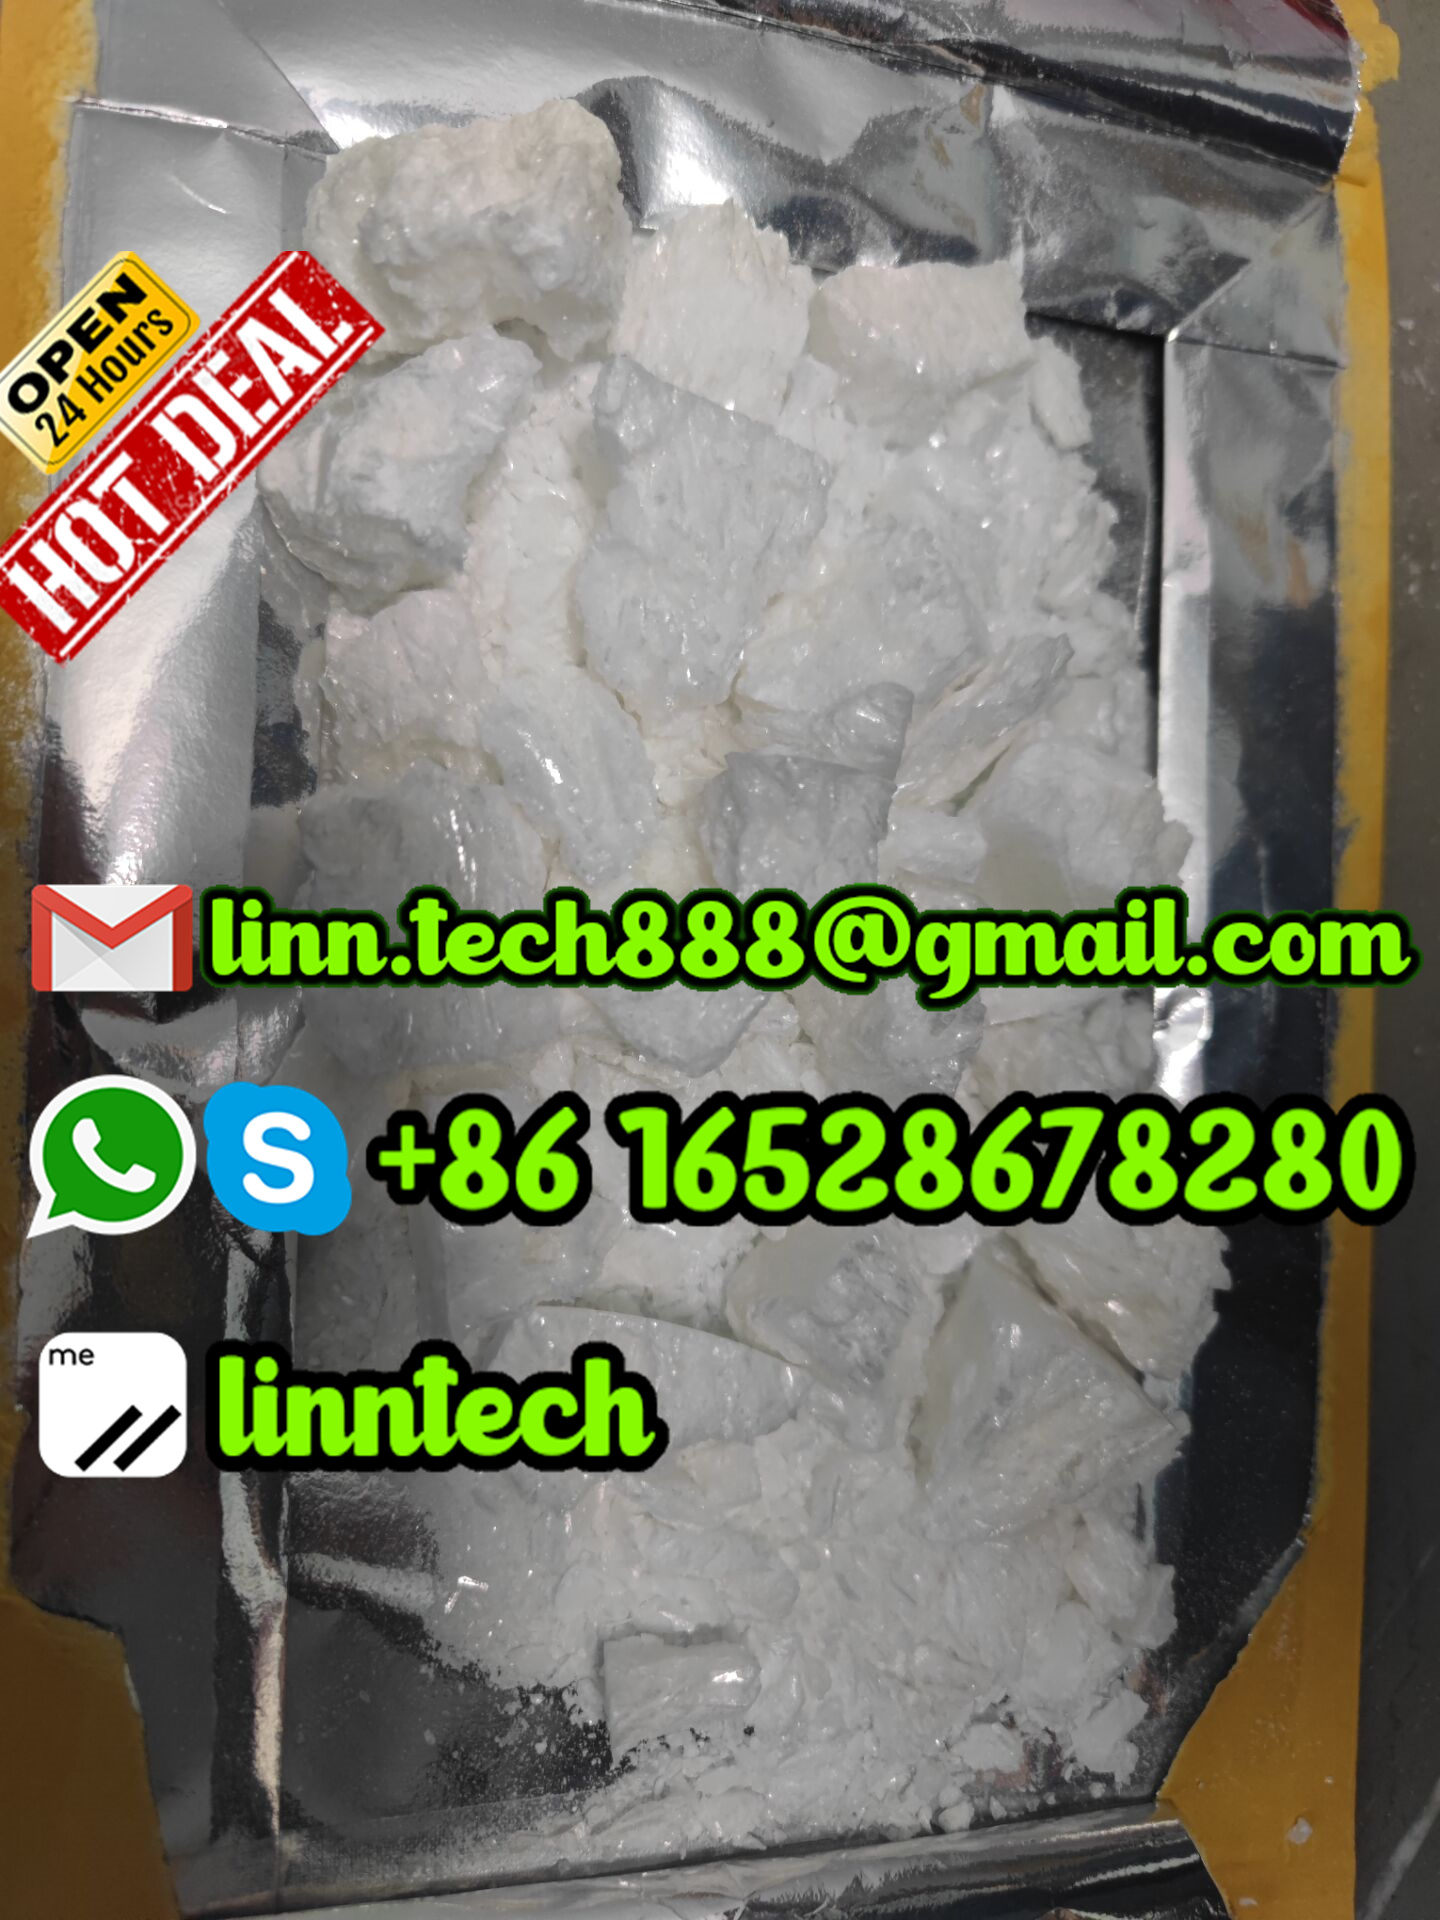 Buy crystal white yellow Eutyones-d5 DMT Molly mdma dmt crystal  Euk cas 478020-50-7 strong  - photo